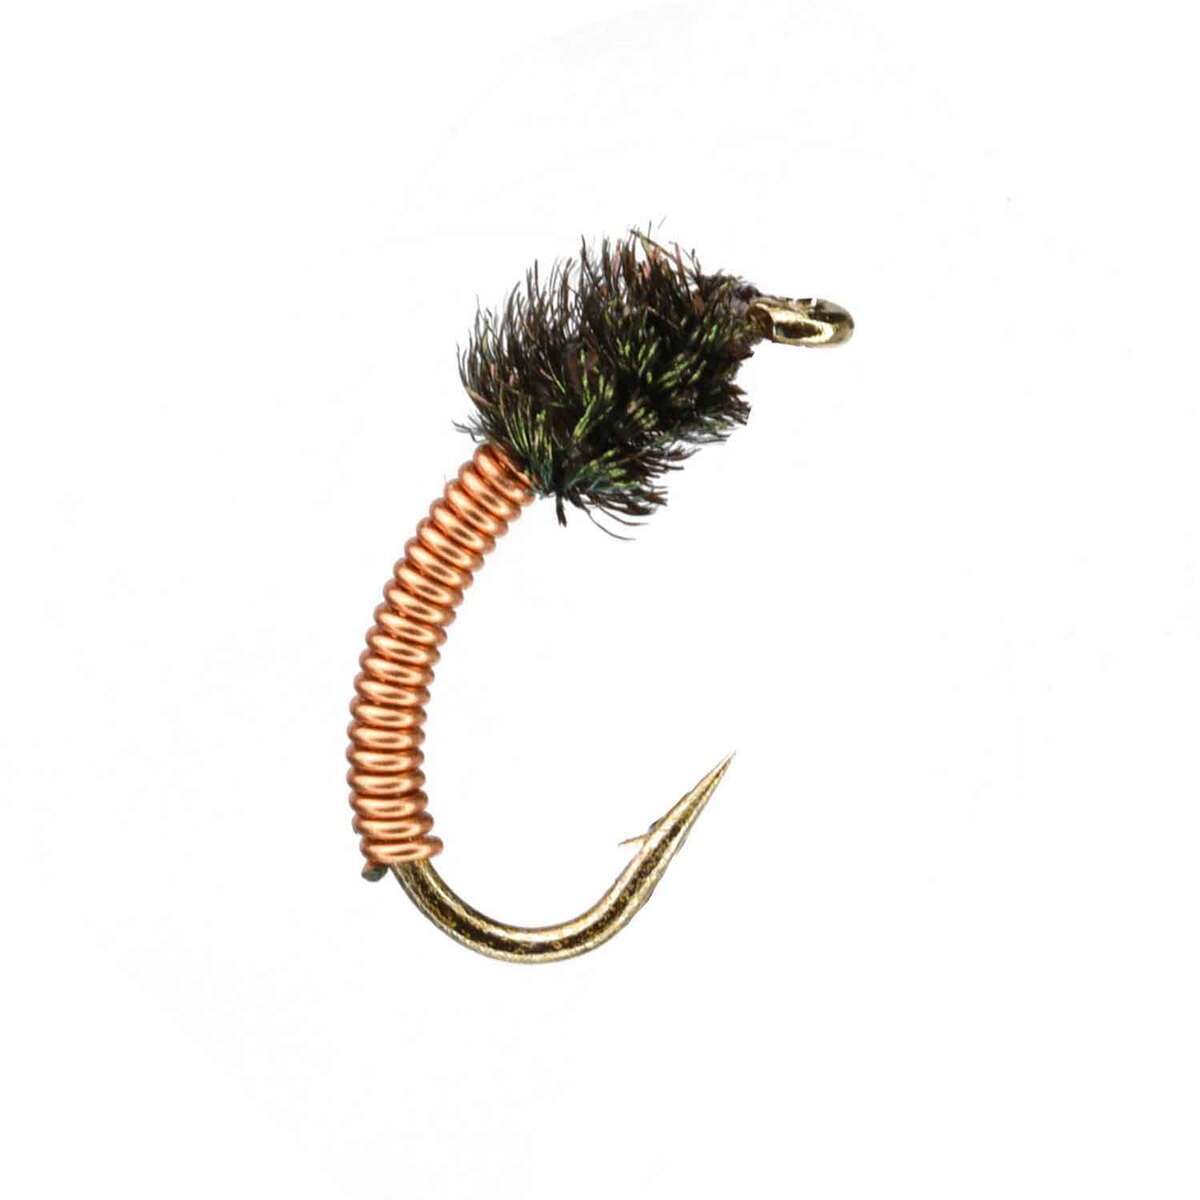 RoundRocks Top 20 Trout Flies Assortment by Sportsman's Warehouse